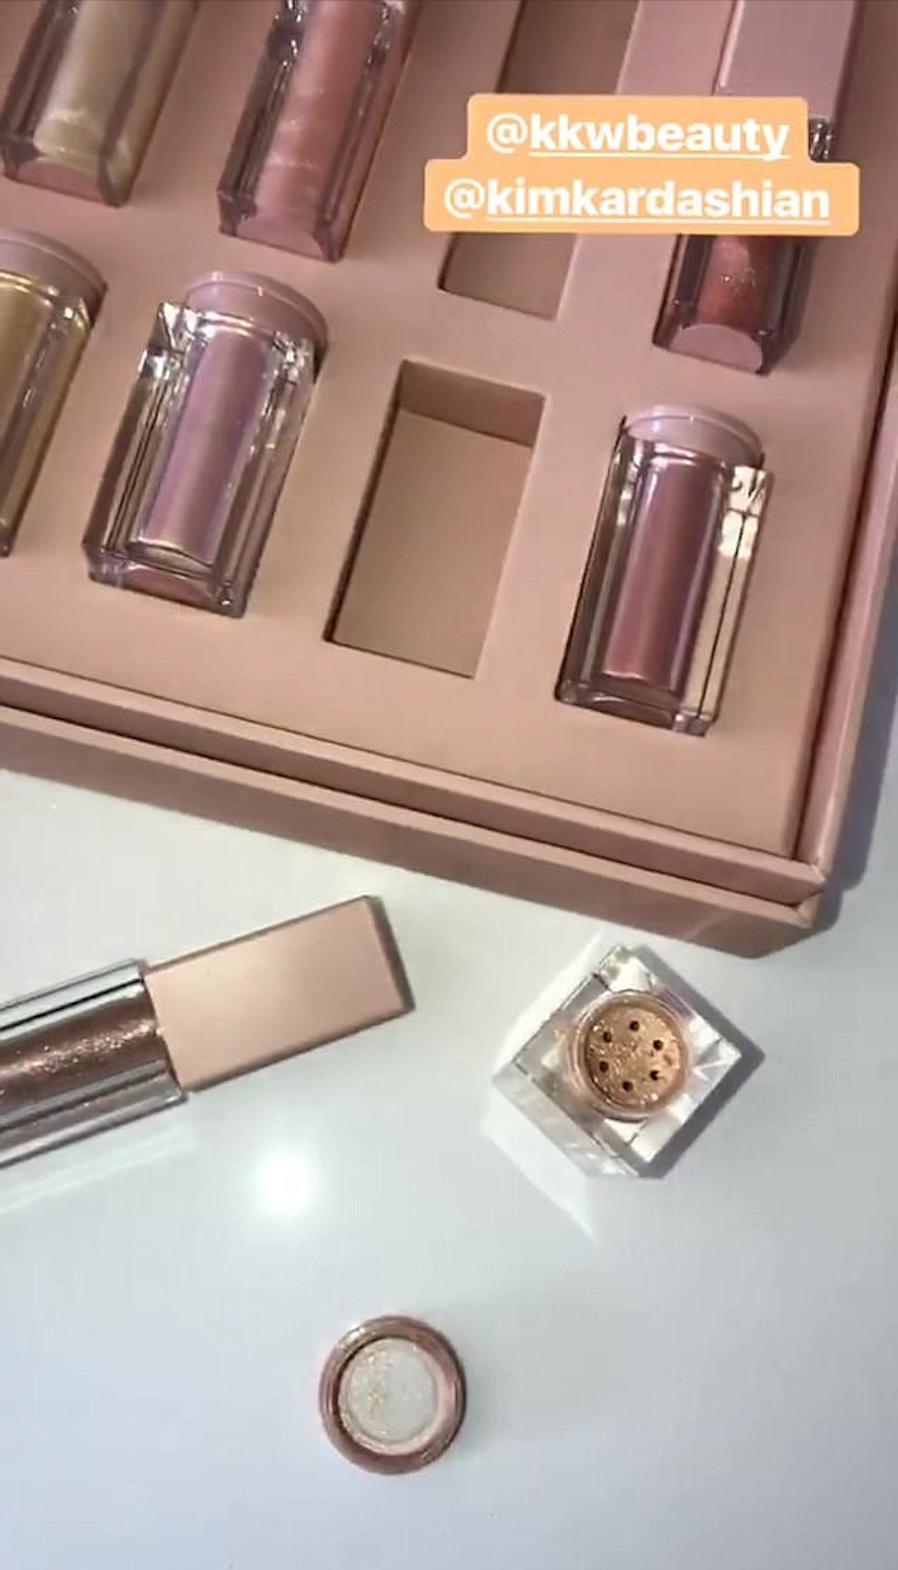 KKW Beauty Glitter Collection